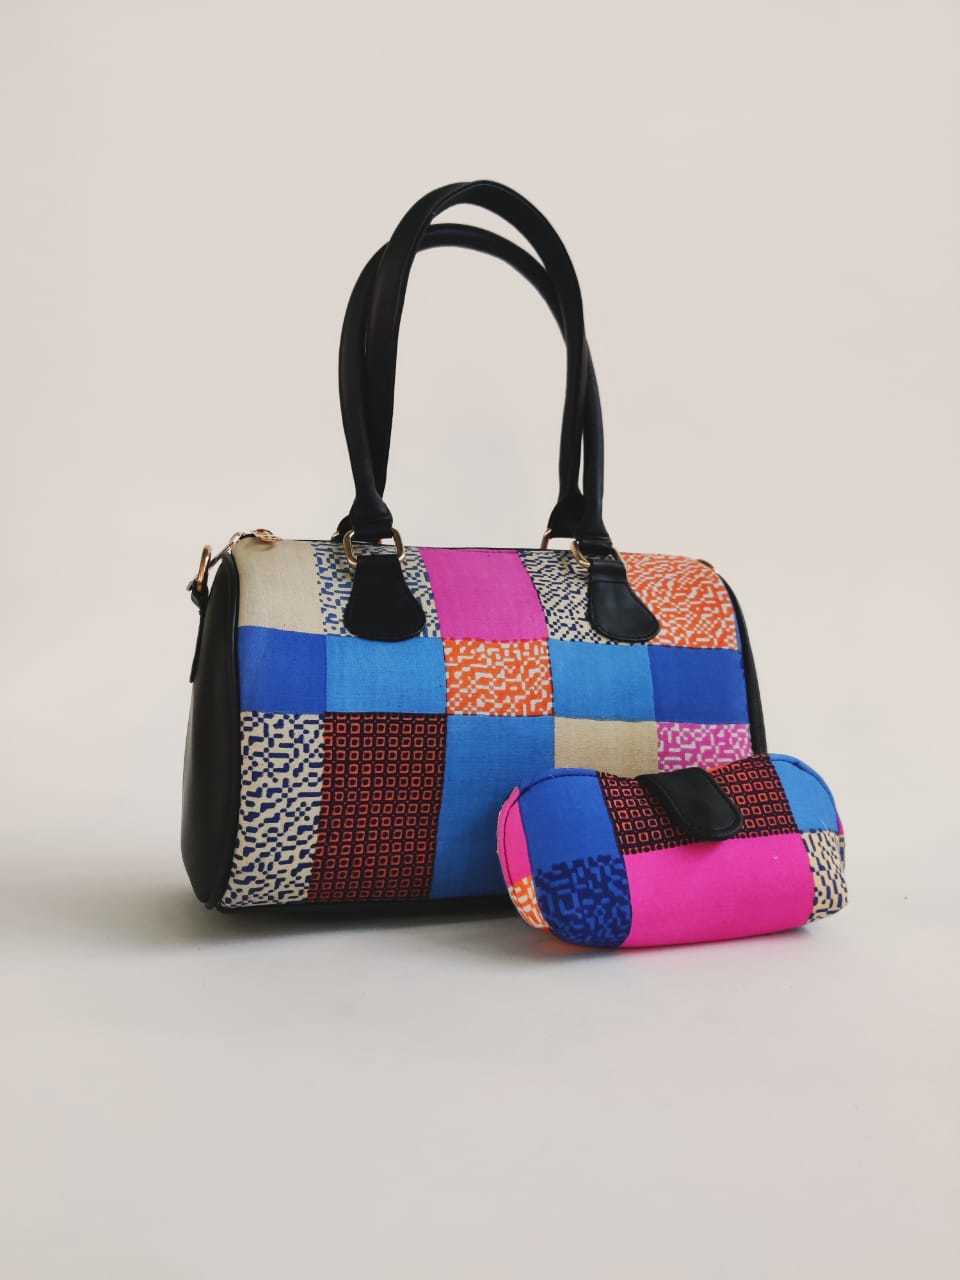 ladies duffle bags with cases